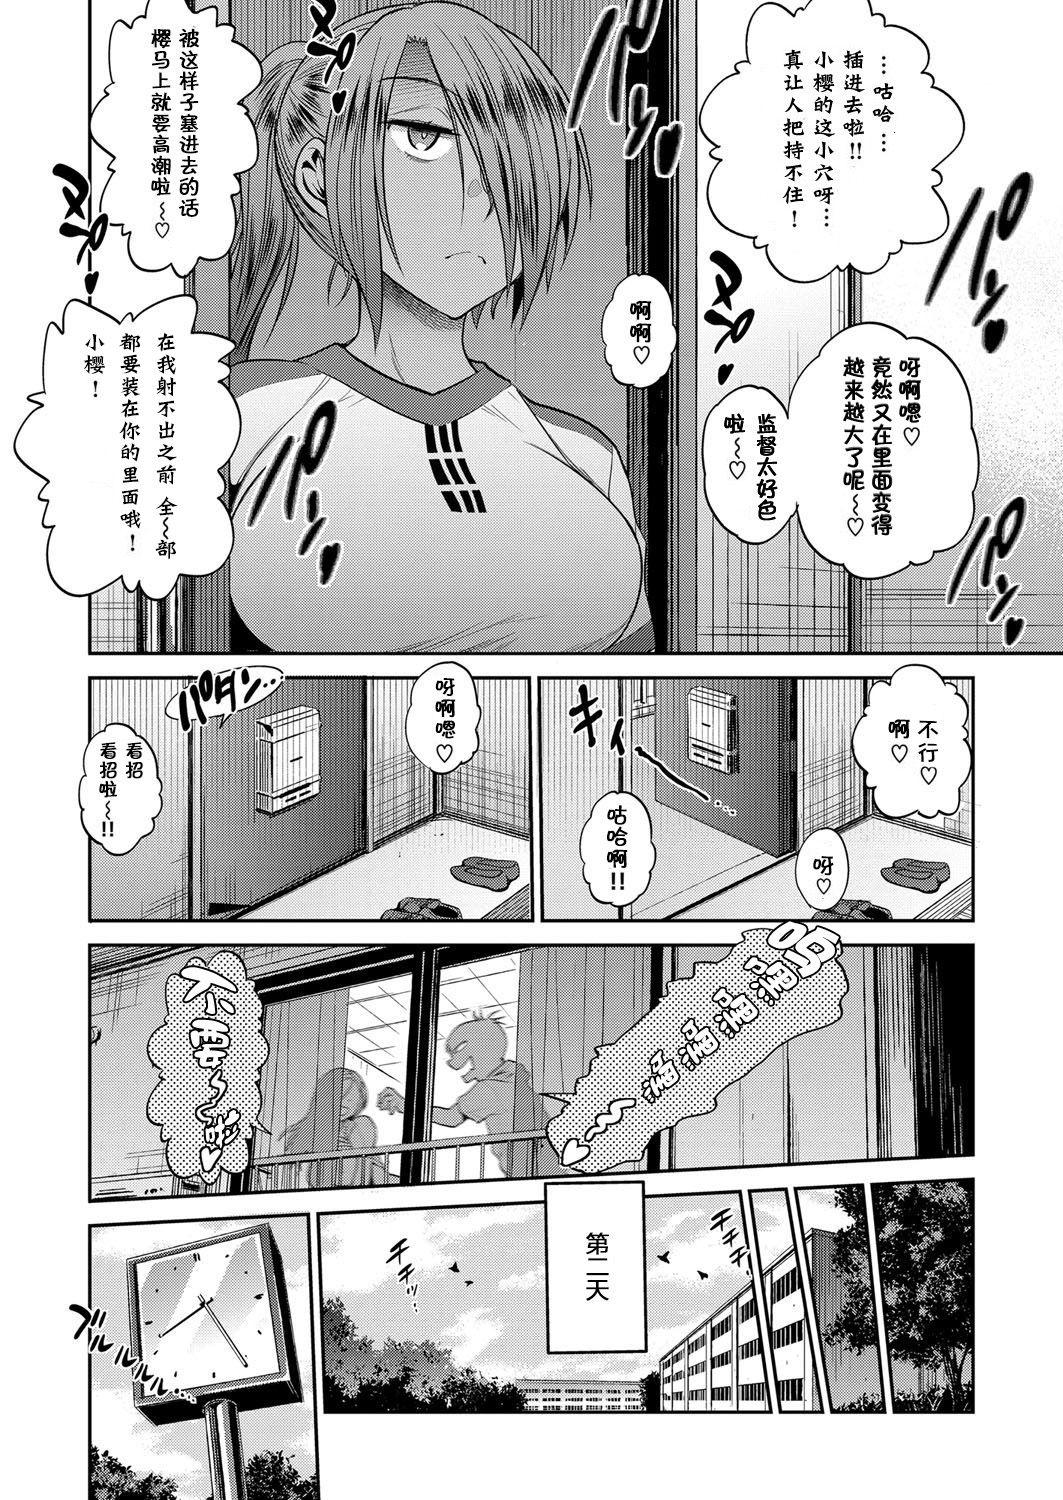 [DISTANCE] Joshi Lacu! - Girls Lacrosse Club ~2 Years Later~ Ch. 1.5 (COMIC ExE 06) [Chinese] [鬼畜王汉化组] [Digital] [DISTANCE] じょしラク！～2Years Later～ 第1.5話 (コミック エグゼ 06) [中国翻訳] [DL版]